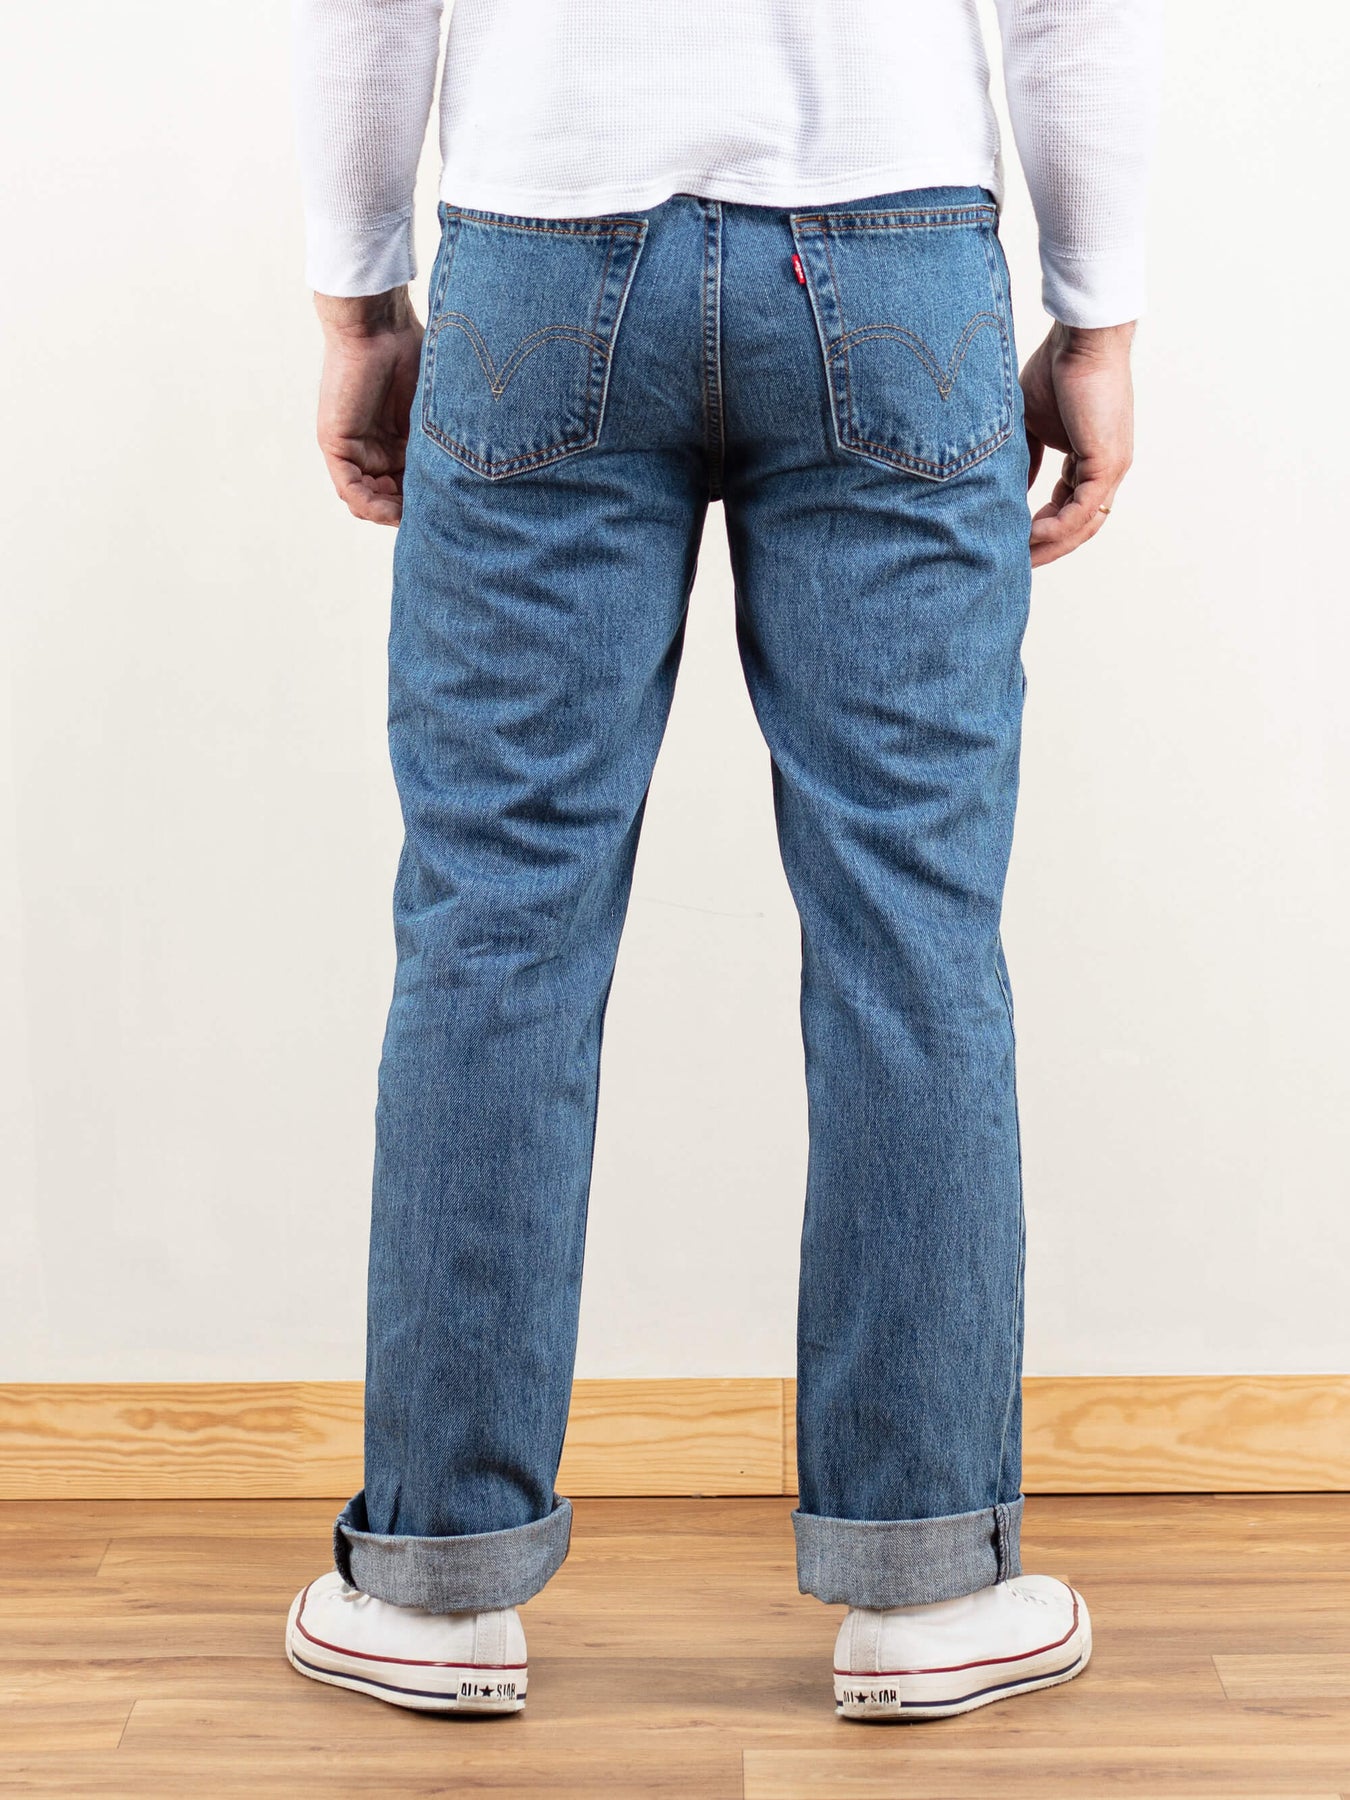 Levi's - The Jean Fits Guys Should be Rocking | Just Jeans™ Online